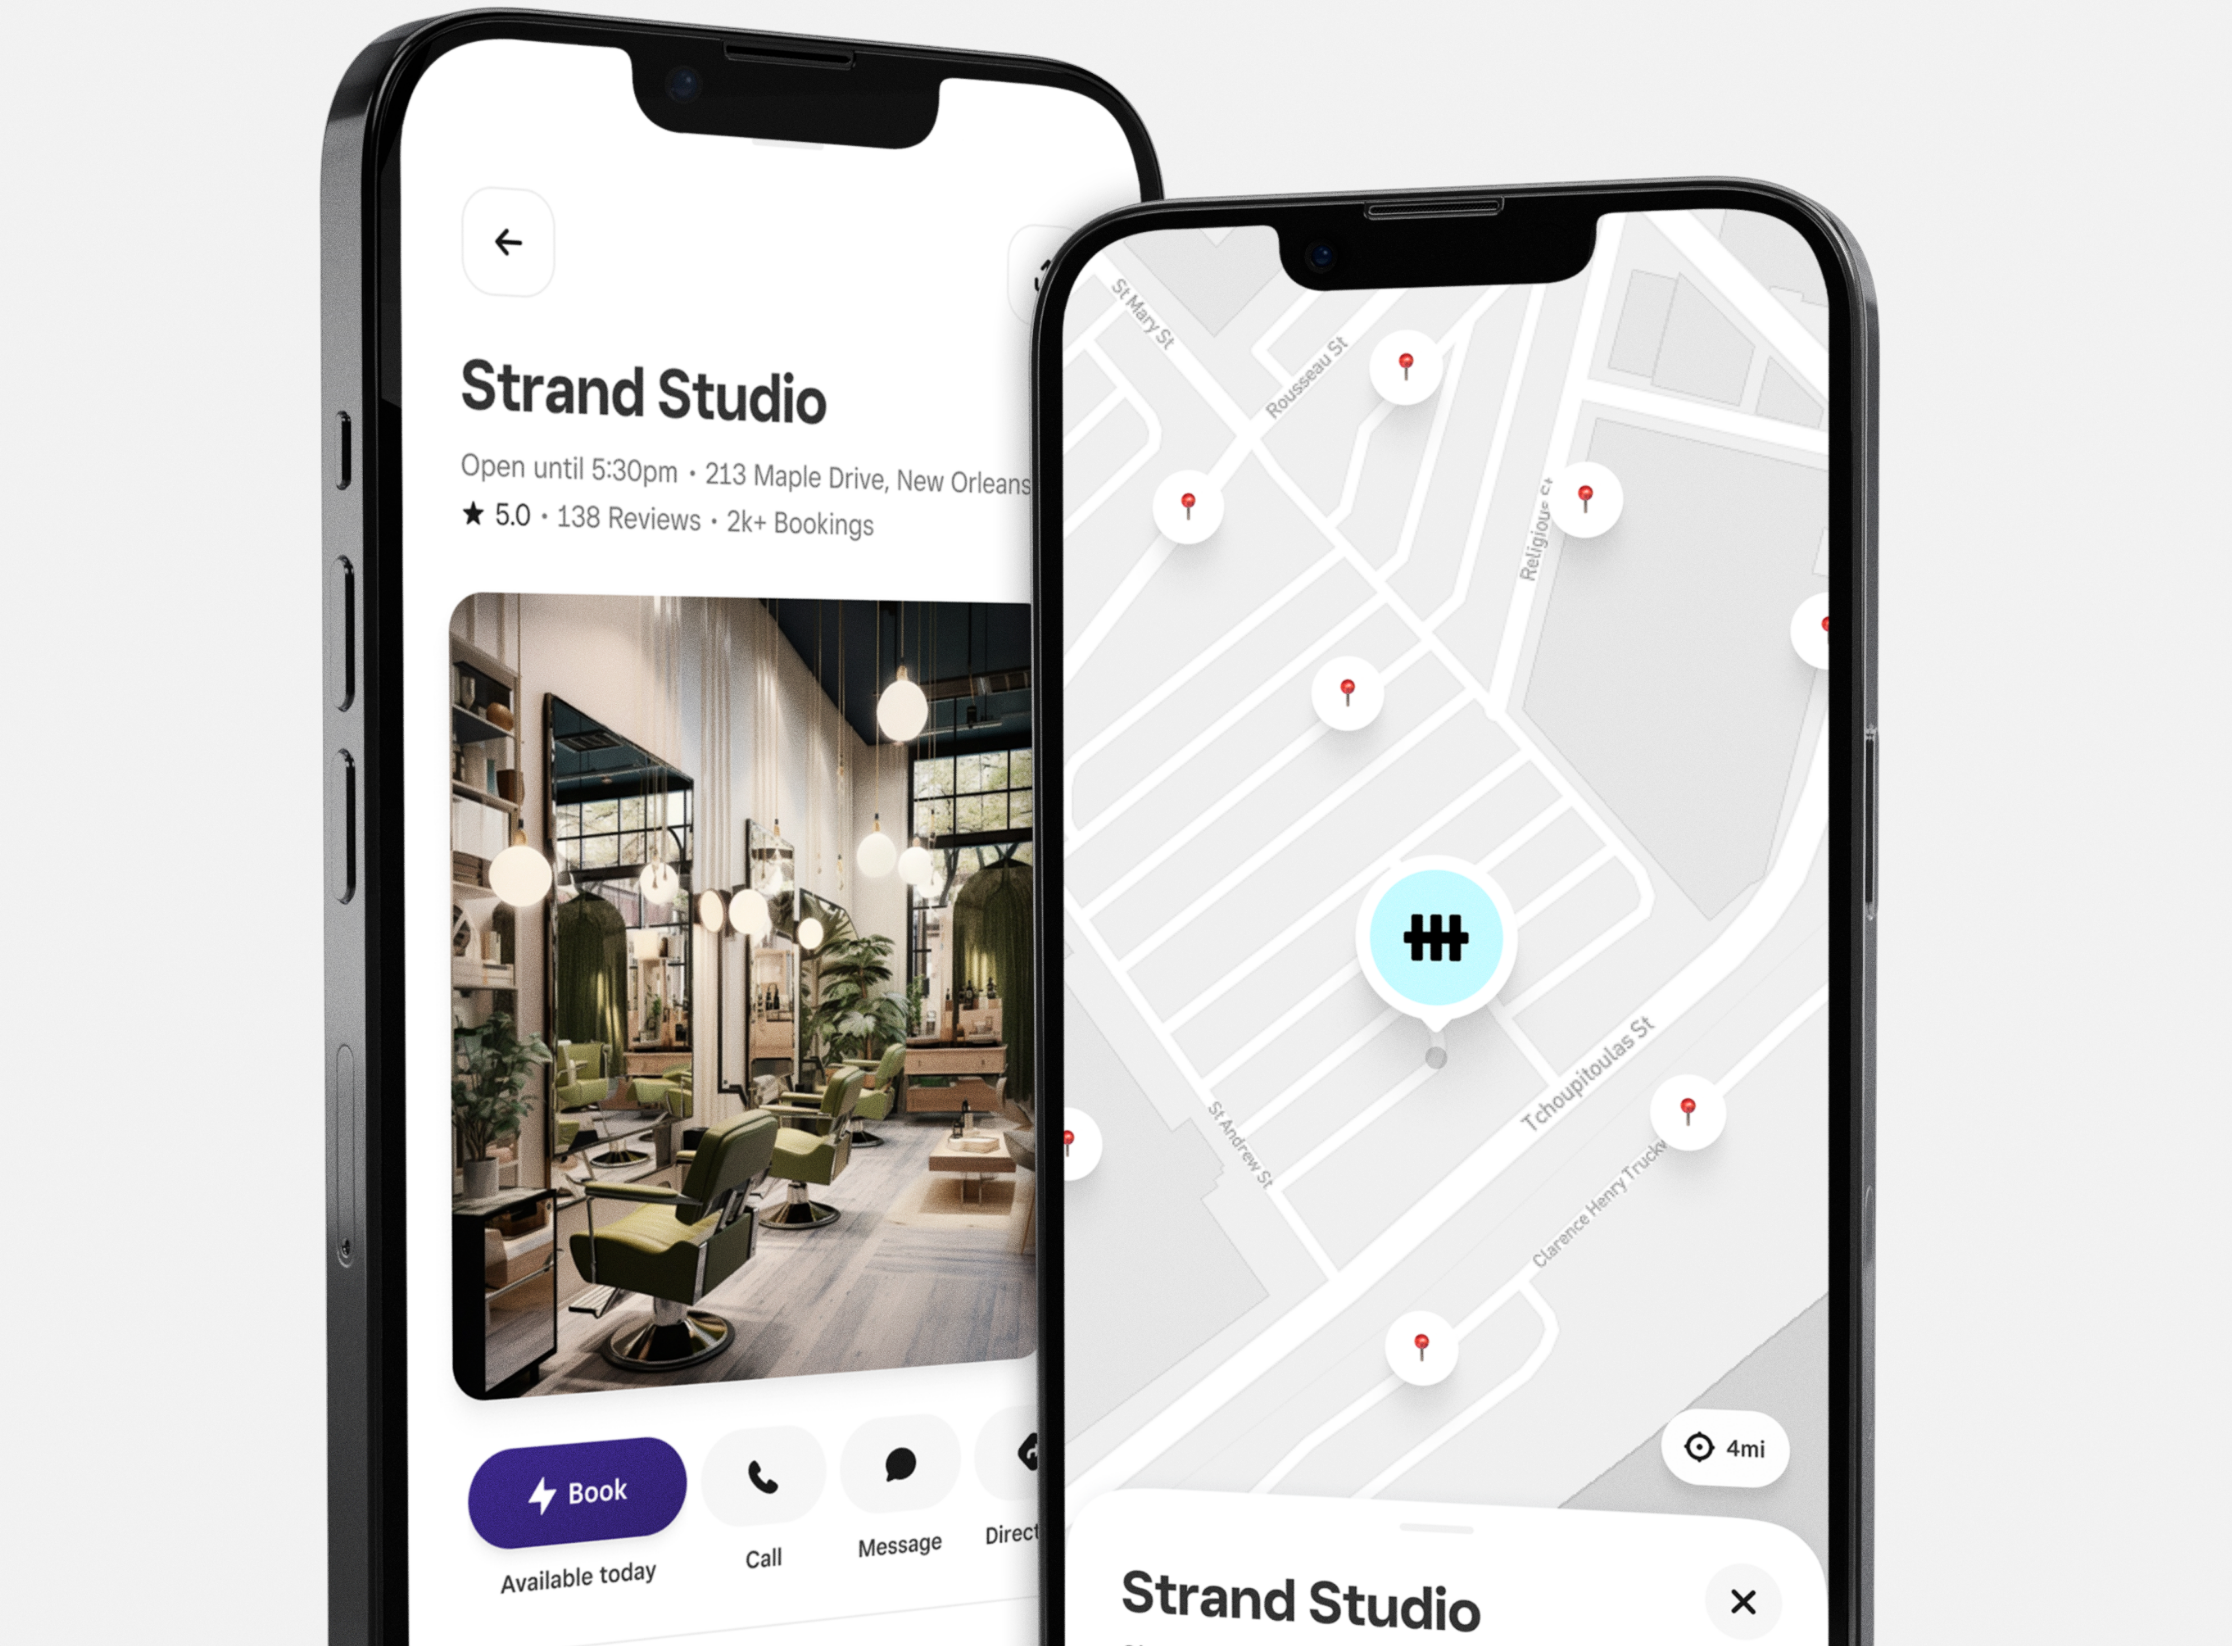 Two phones side by side. One phone screen shows a profile name and image for a business called Strand Studio. The other screen shows a map with Strand Studio’s location.